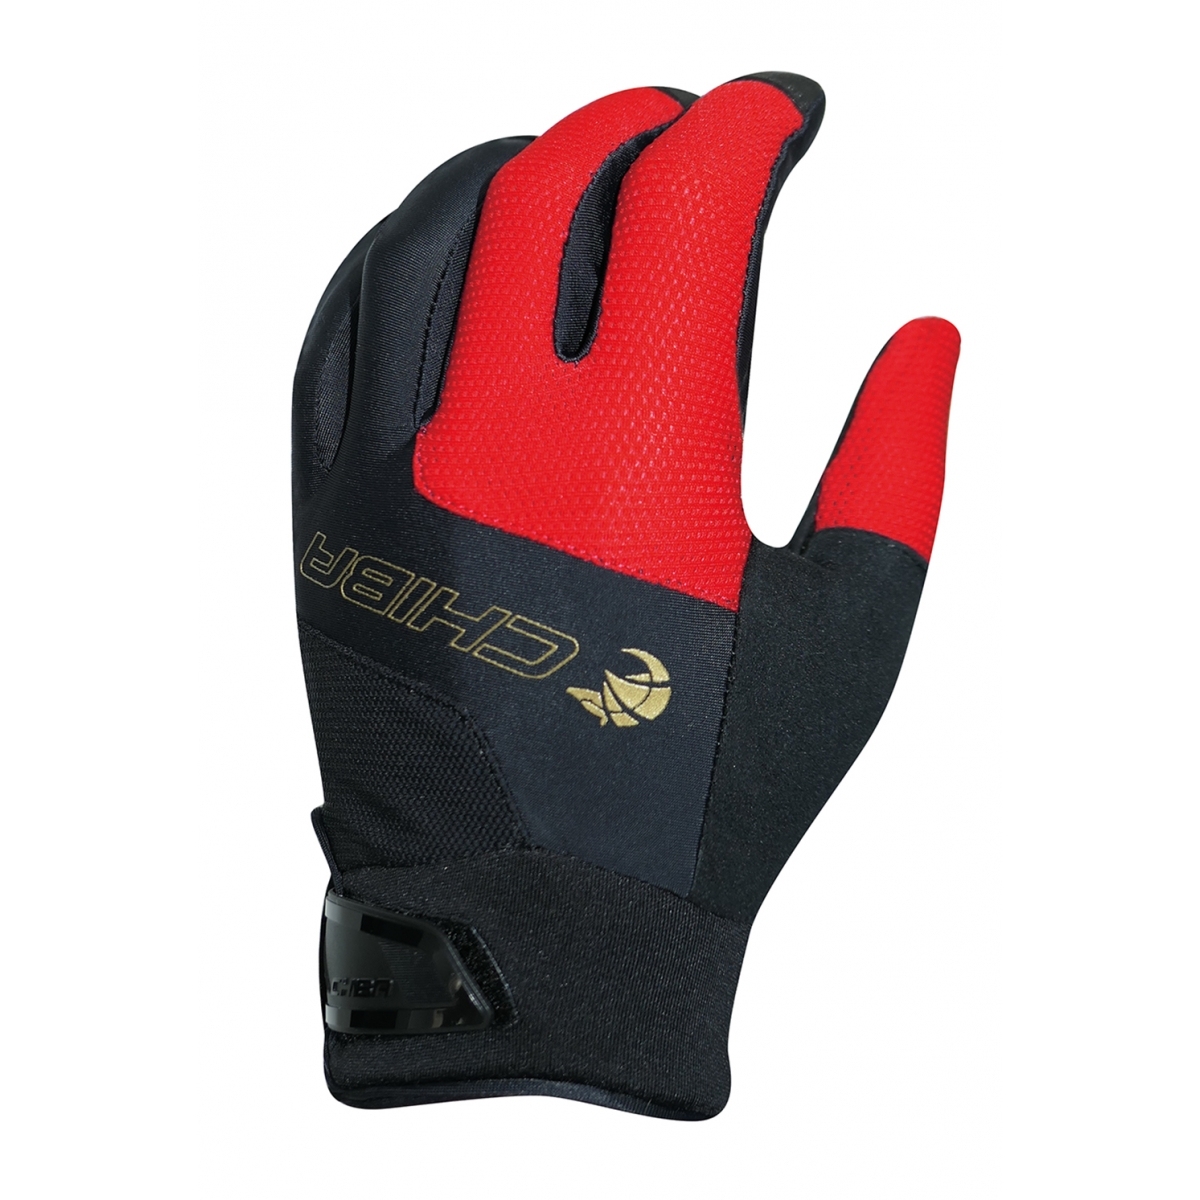 Picture of Chiba Viper Cycling Gloves - red